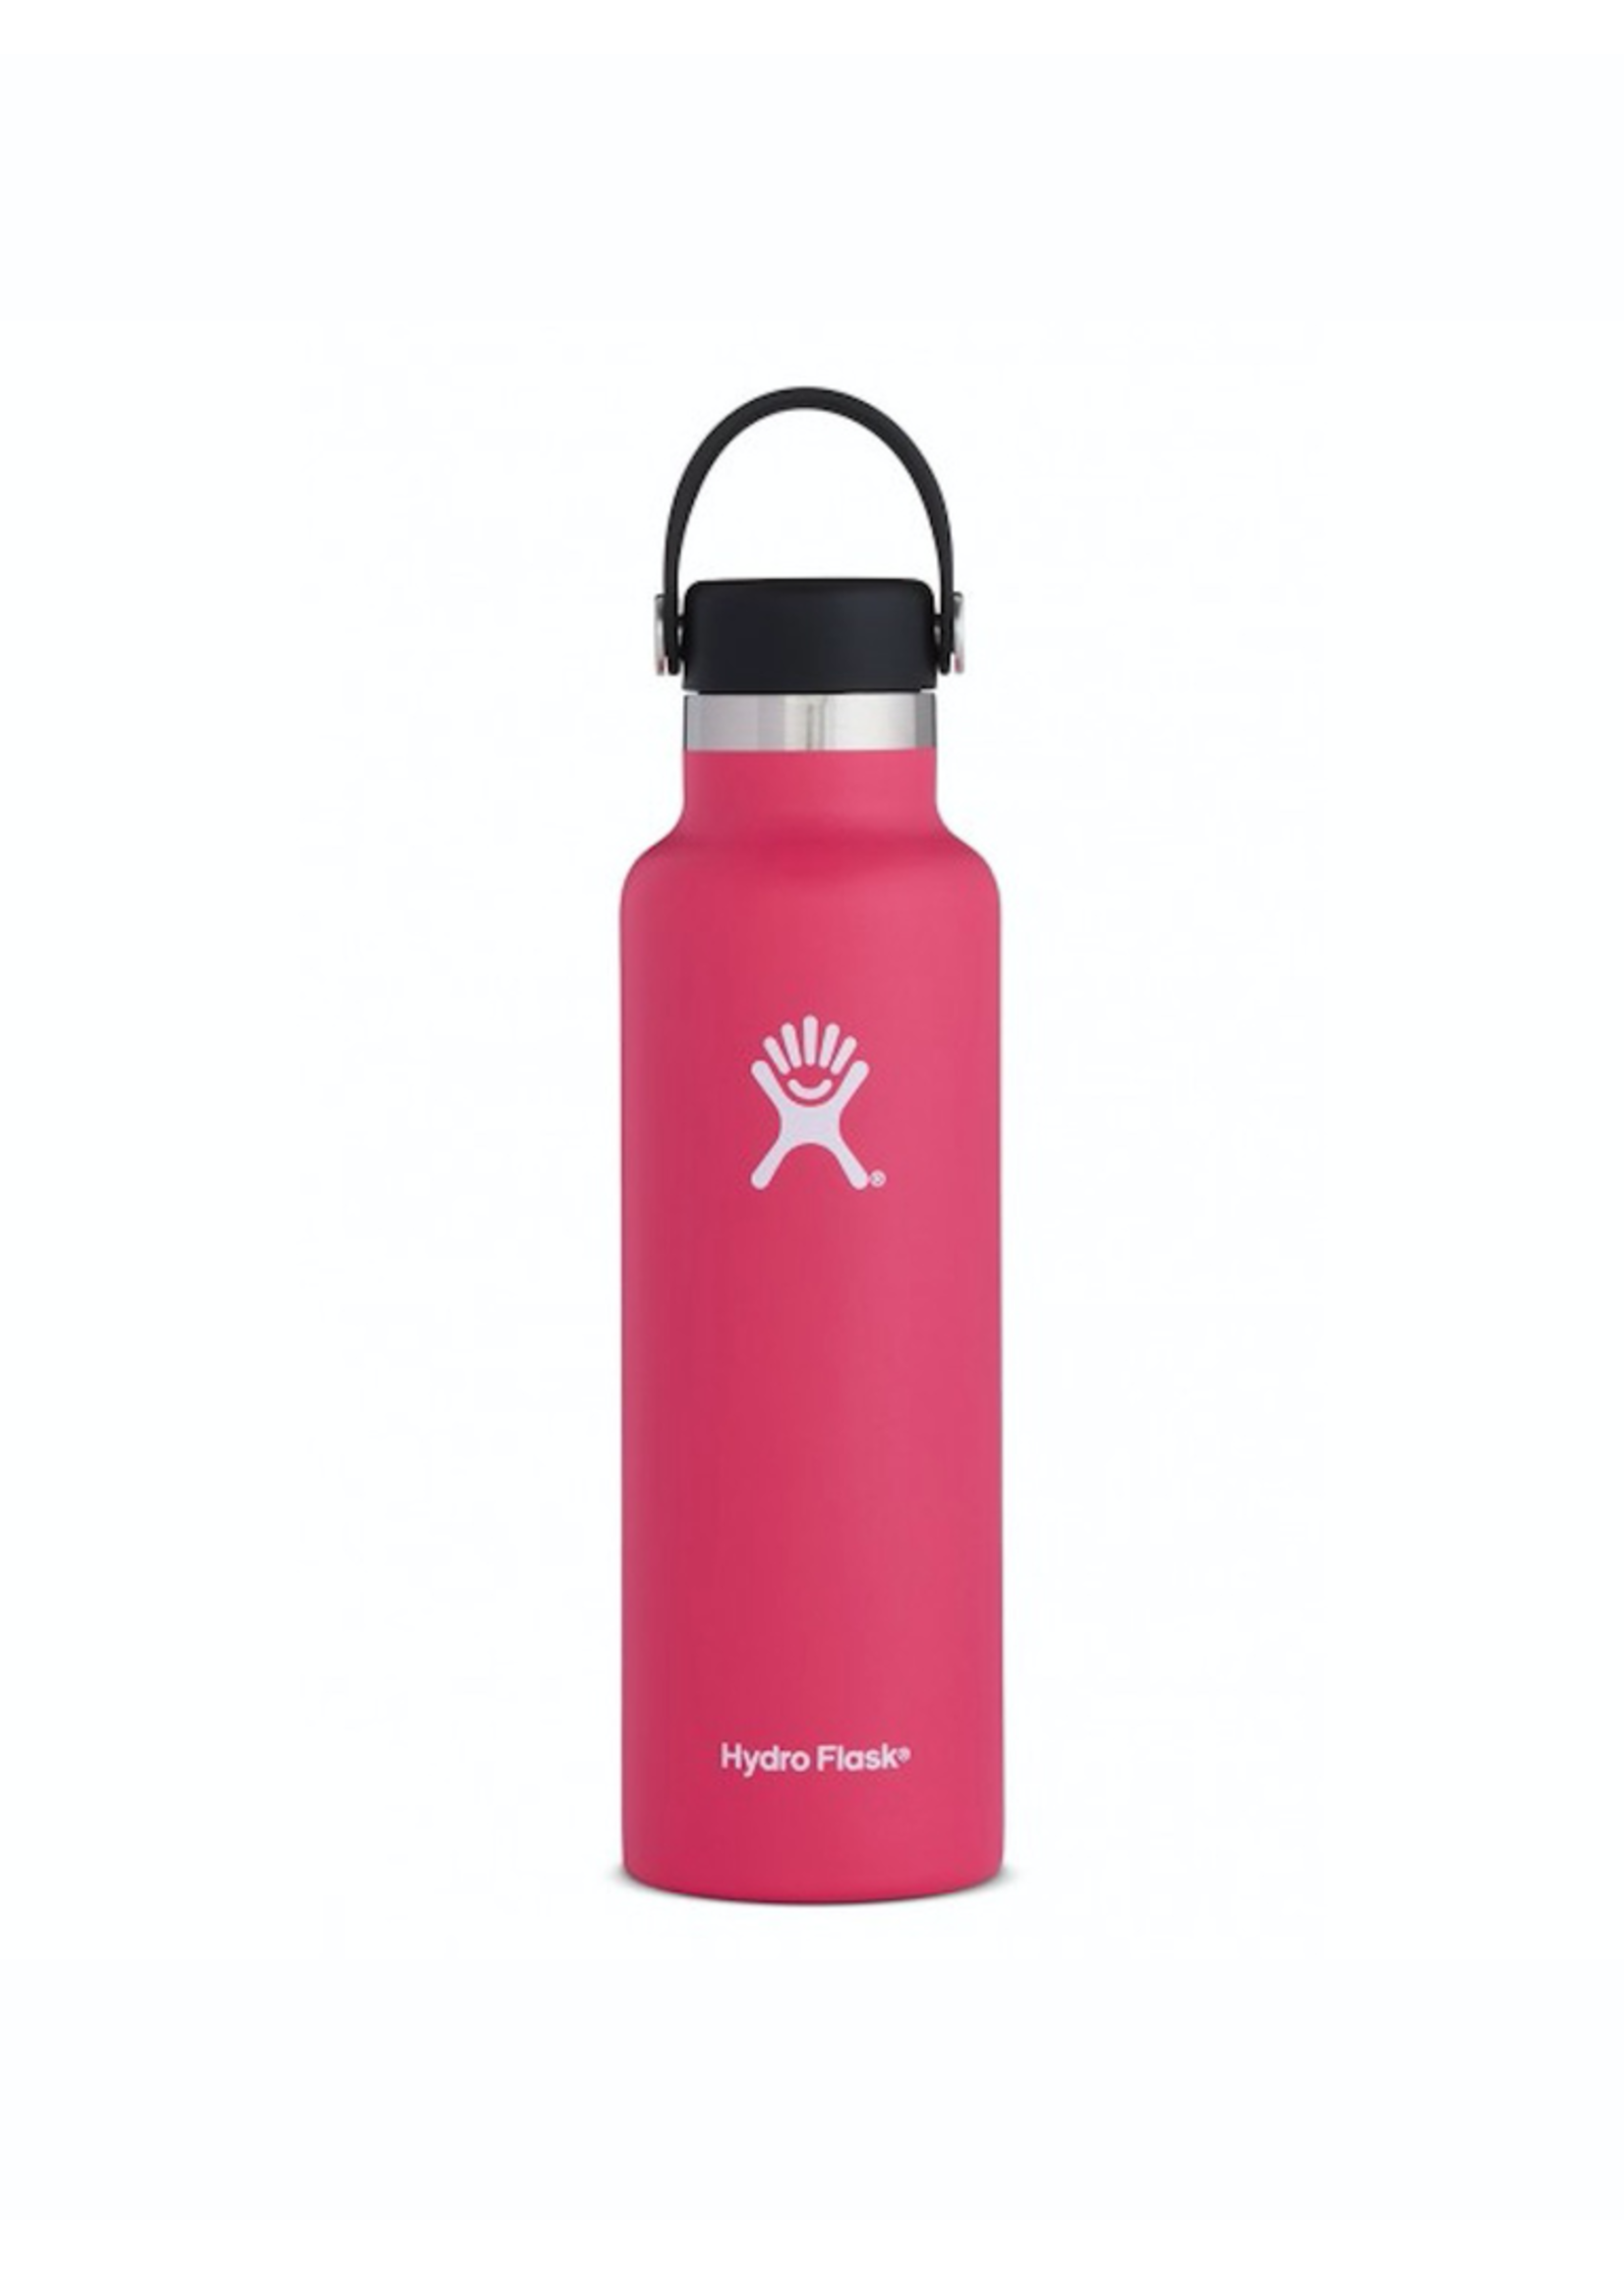 Hydro Flask Hydro Flask, 21 oz Standard Mouth Flex Cap Insulated Stainless Steel Bottle in Watermelon